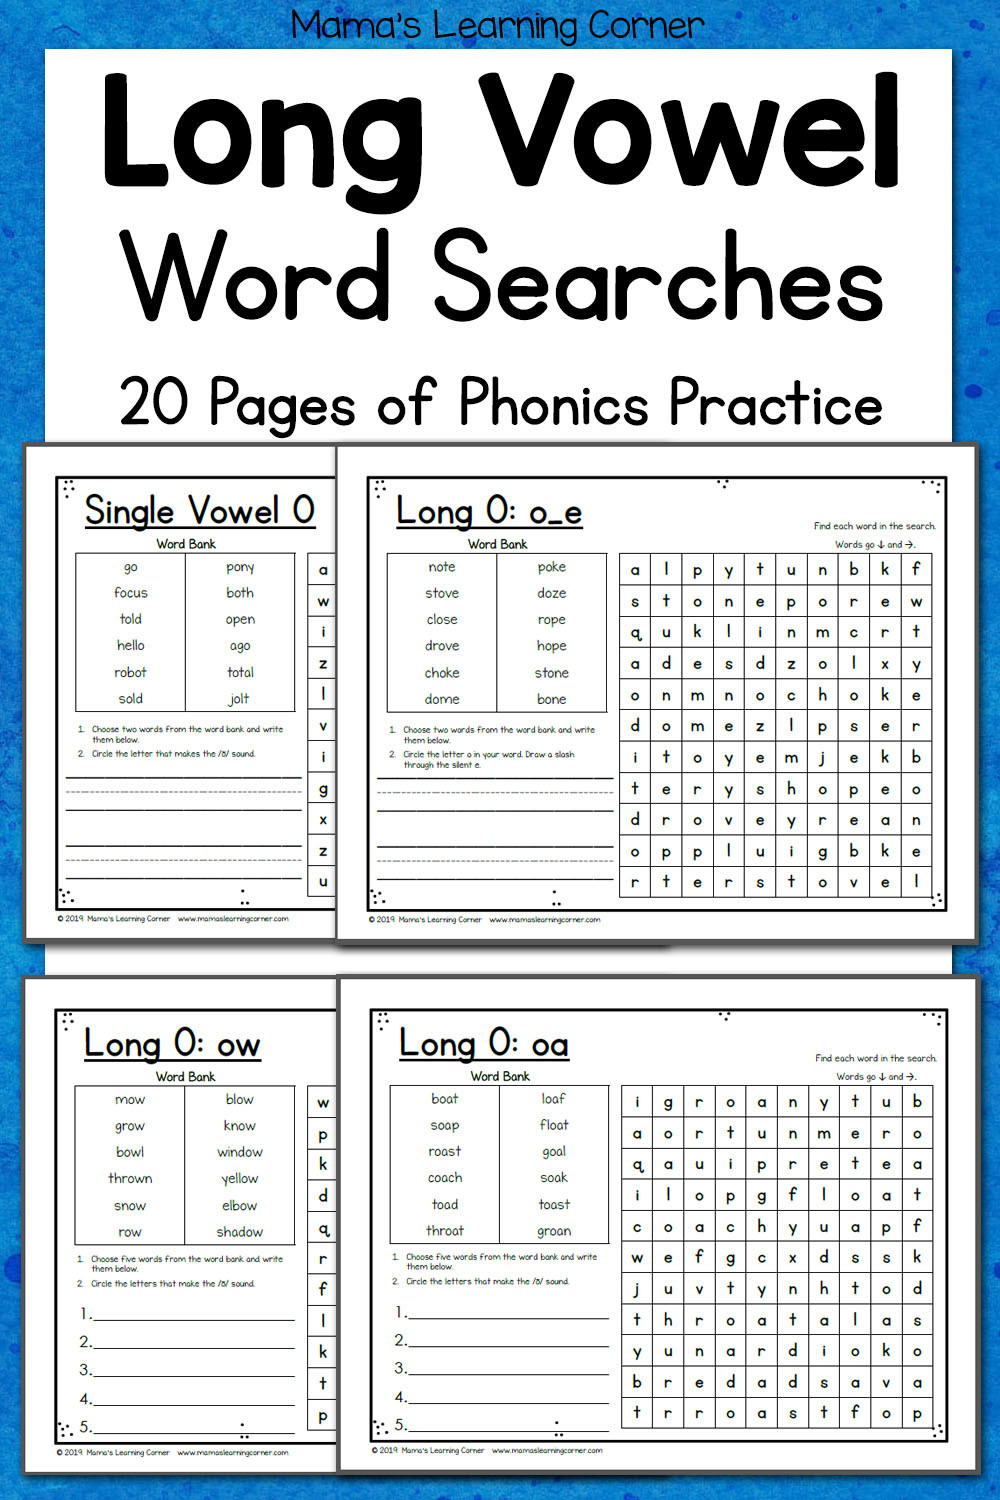 Schwa sound Worksheets Grade 2 Long Vowel Word Search Puzzles Mamas Learning Corner